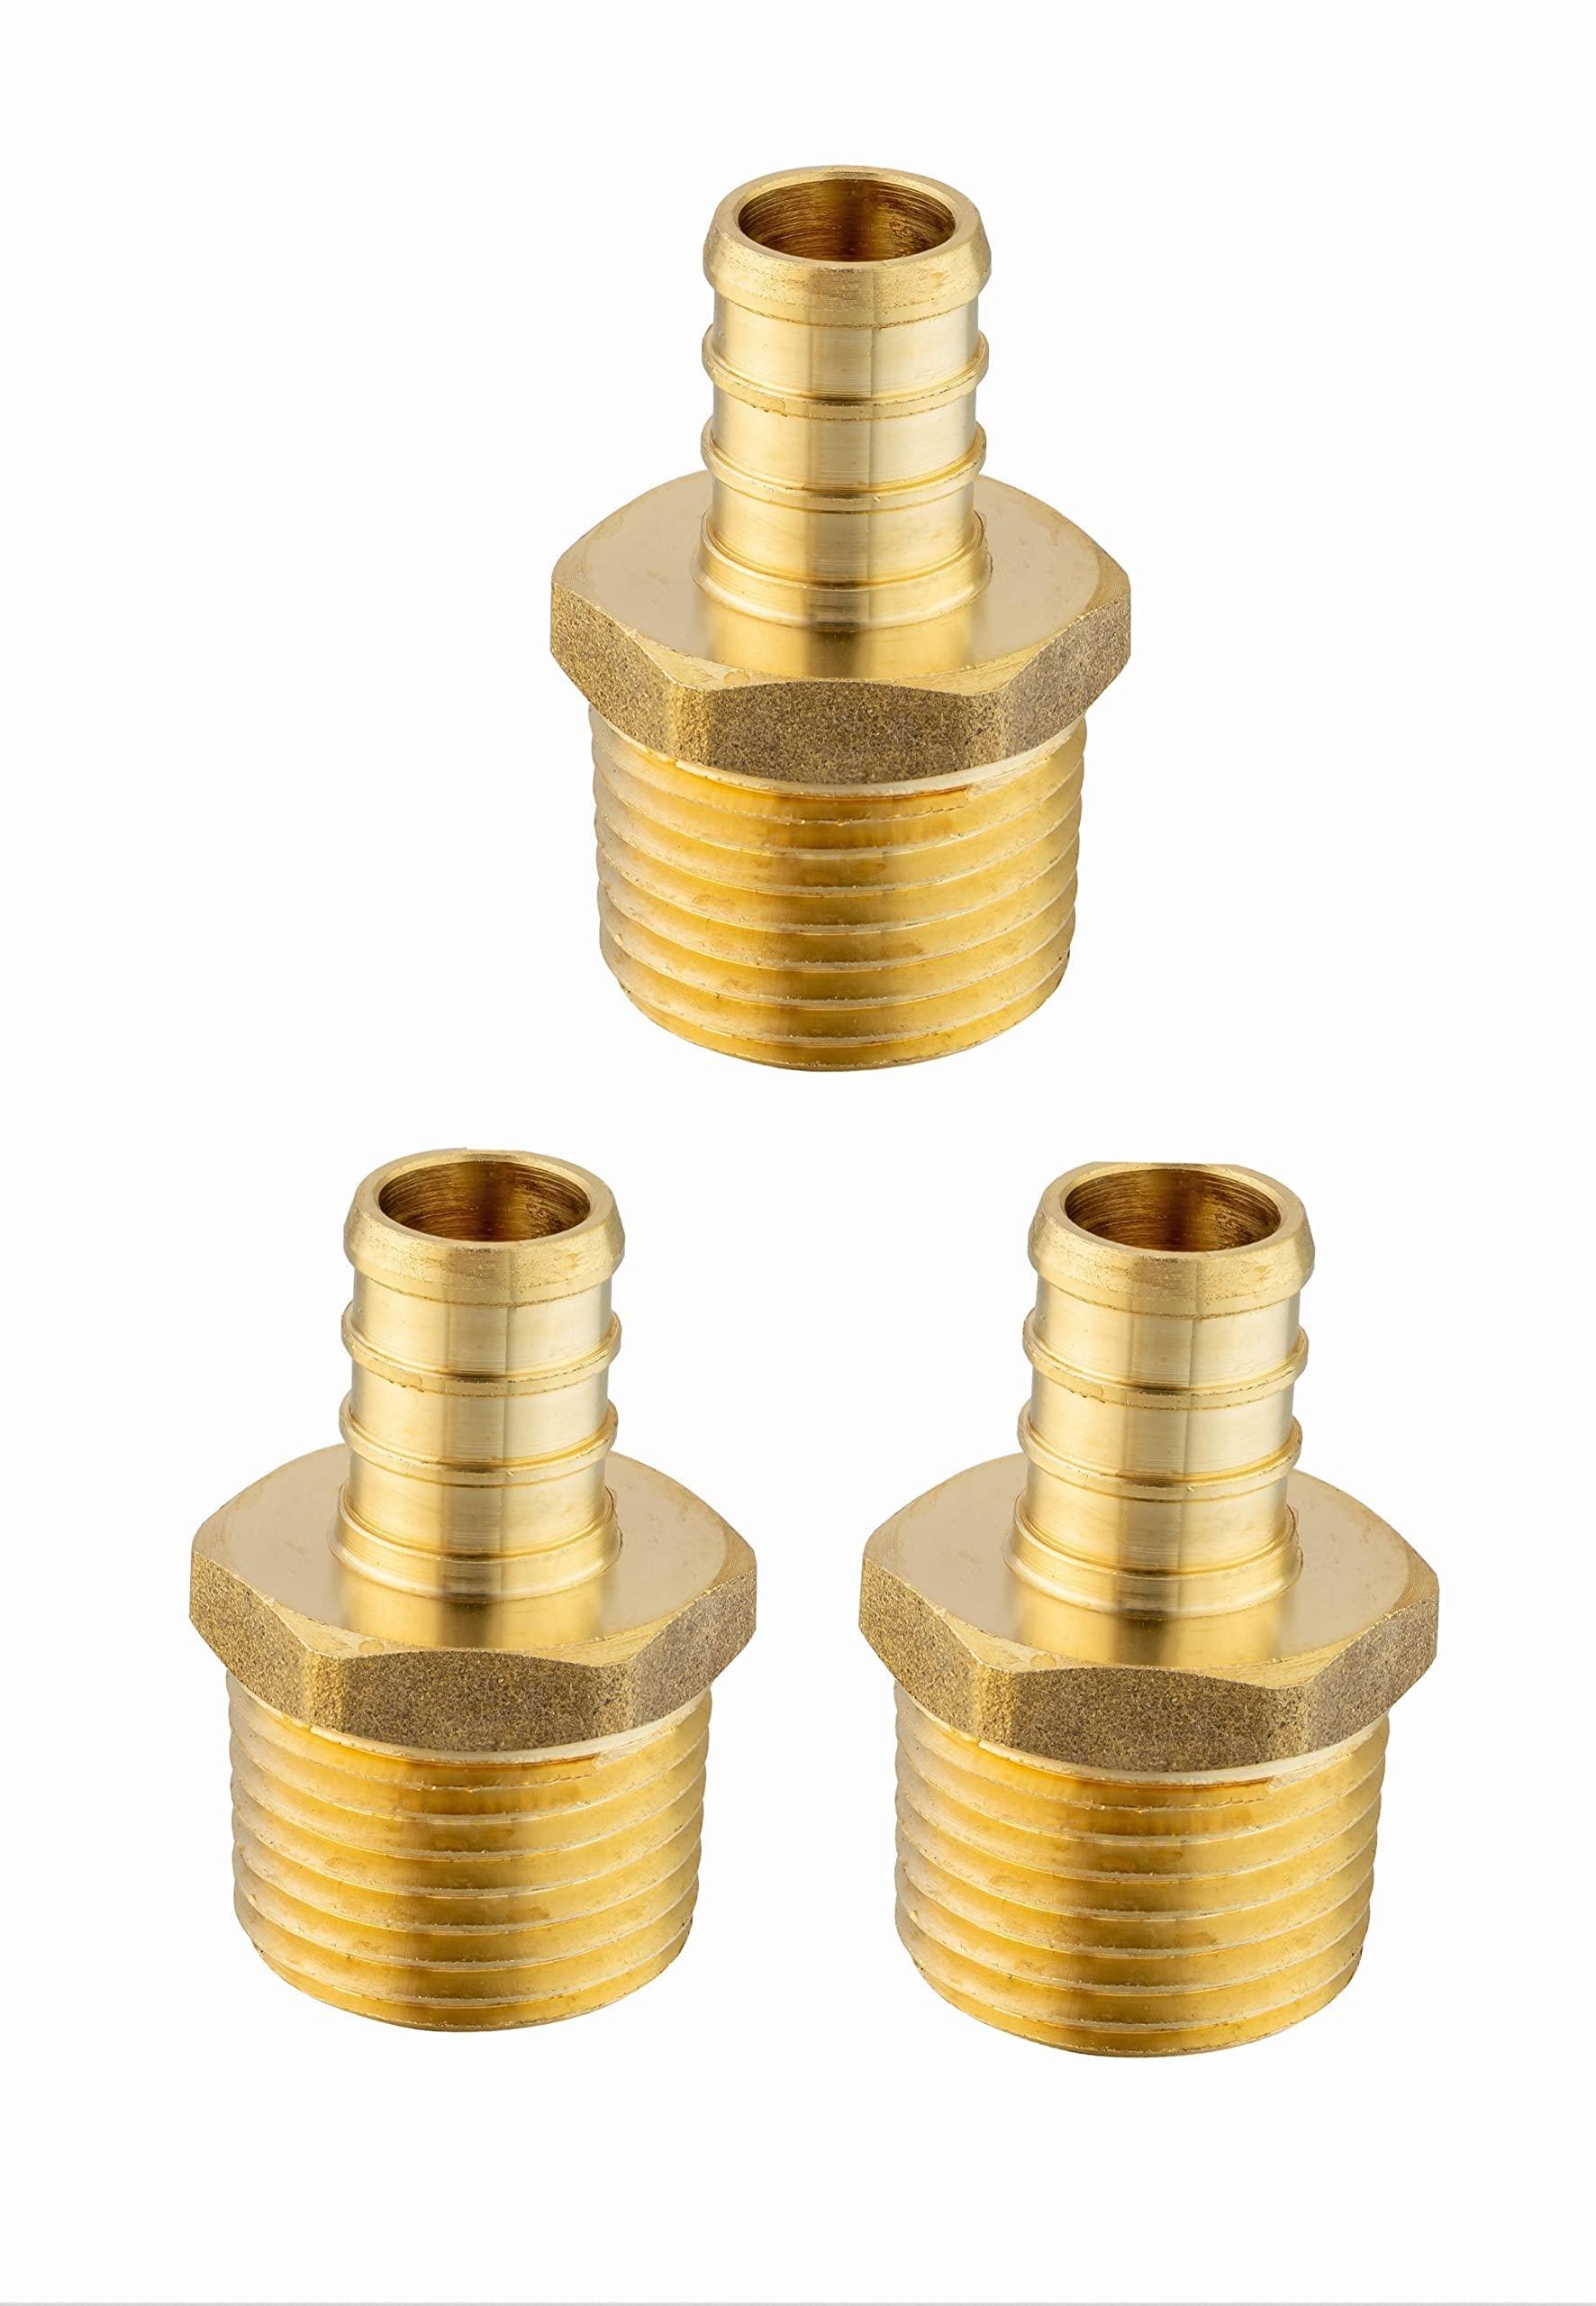 (Pack of 3) EFIELD Pex 3/4 Inch x 3/4 Inch NPT Male Adapter Brass Crimp Fitting ()